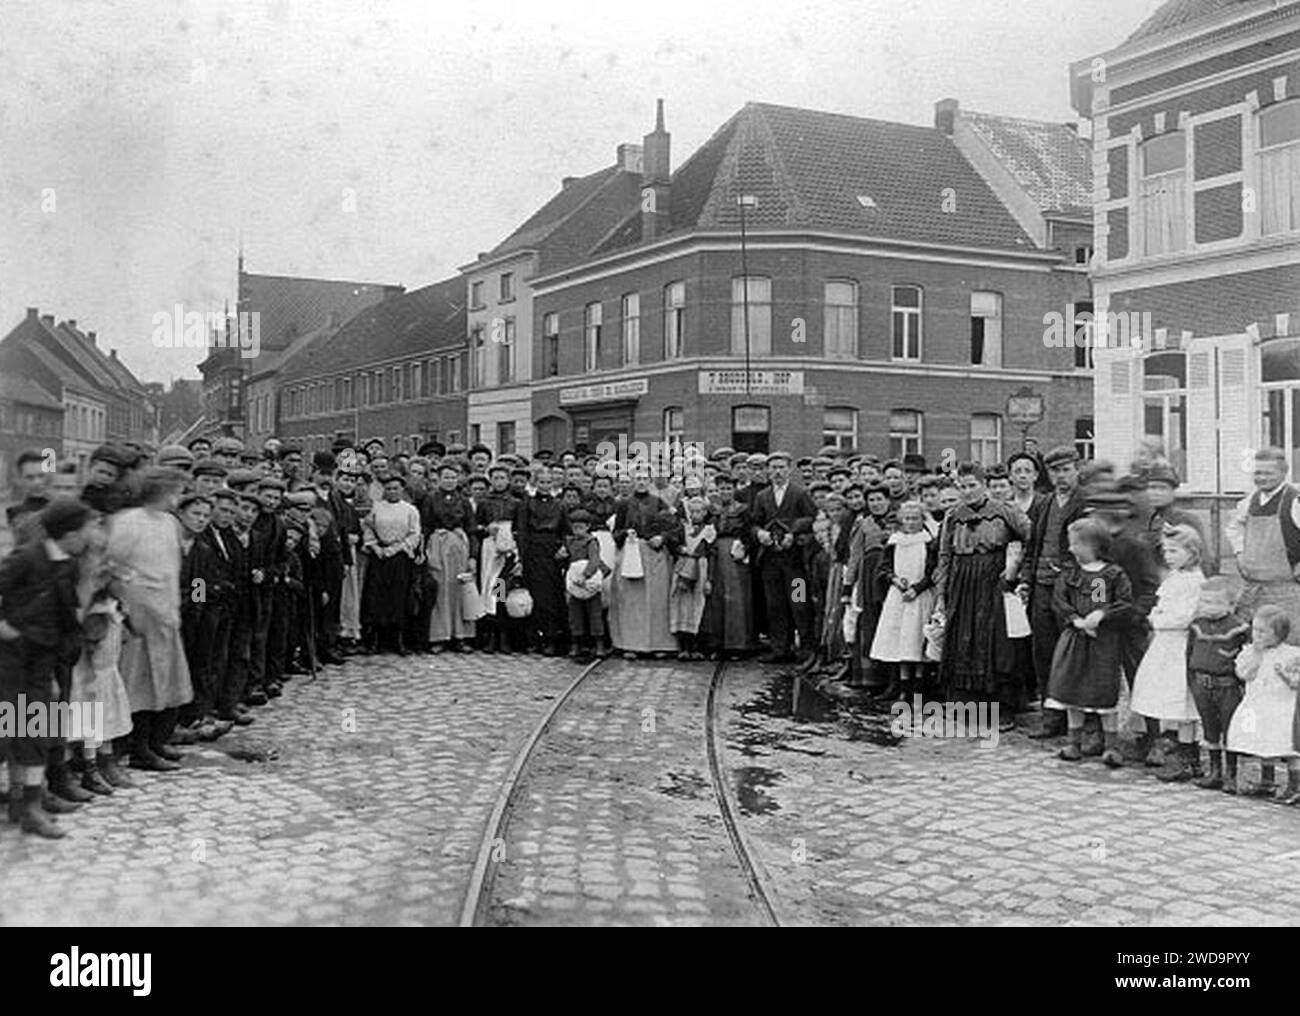 1907 strike at Beernaerts, Wetteren - workers amass in town after receiving soup. Stock Photo